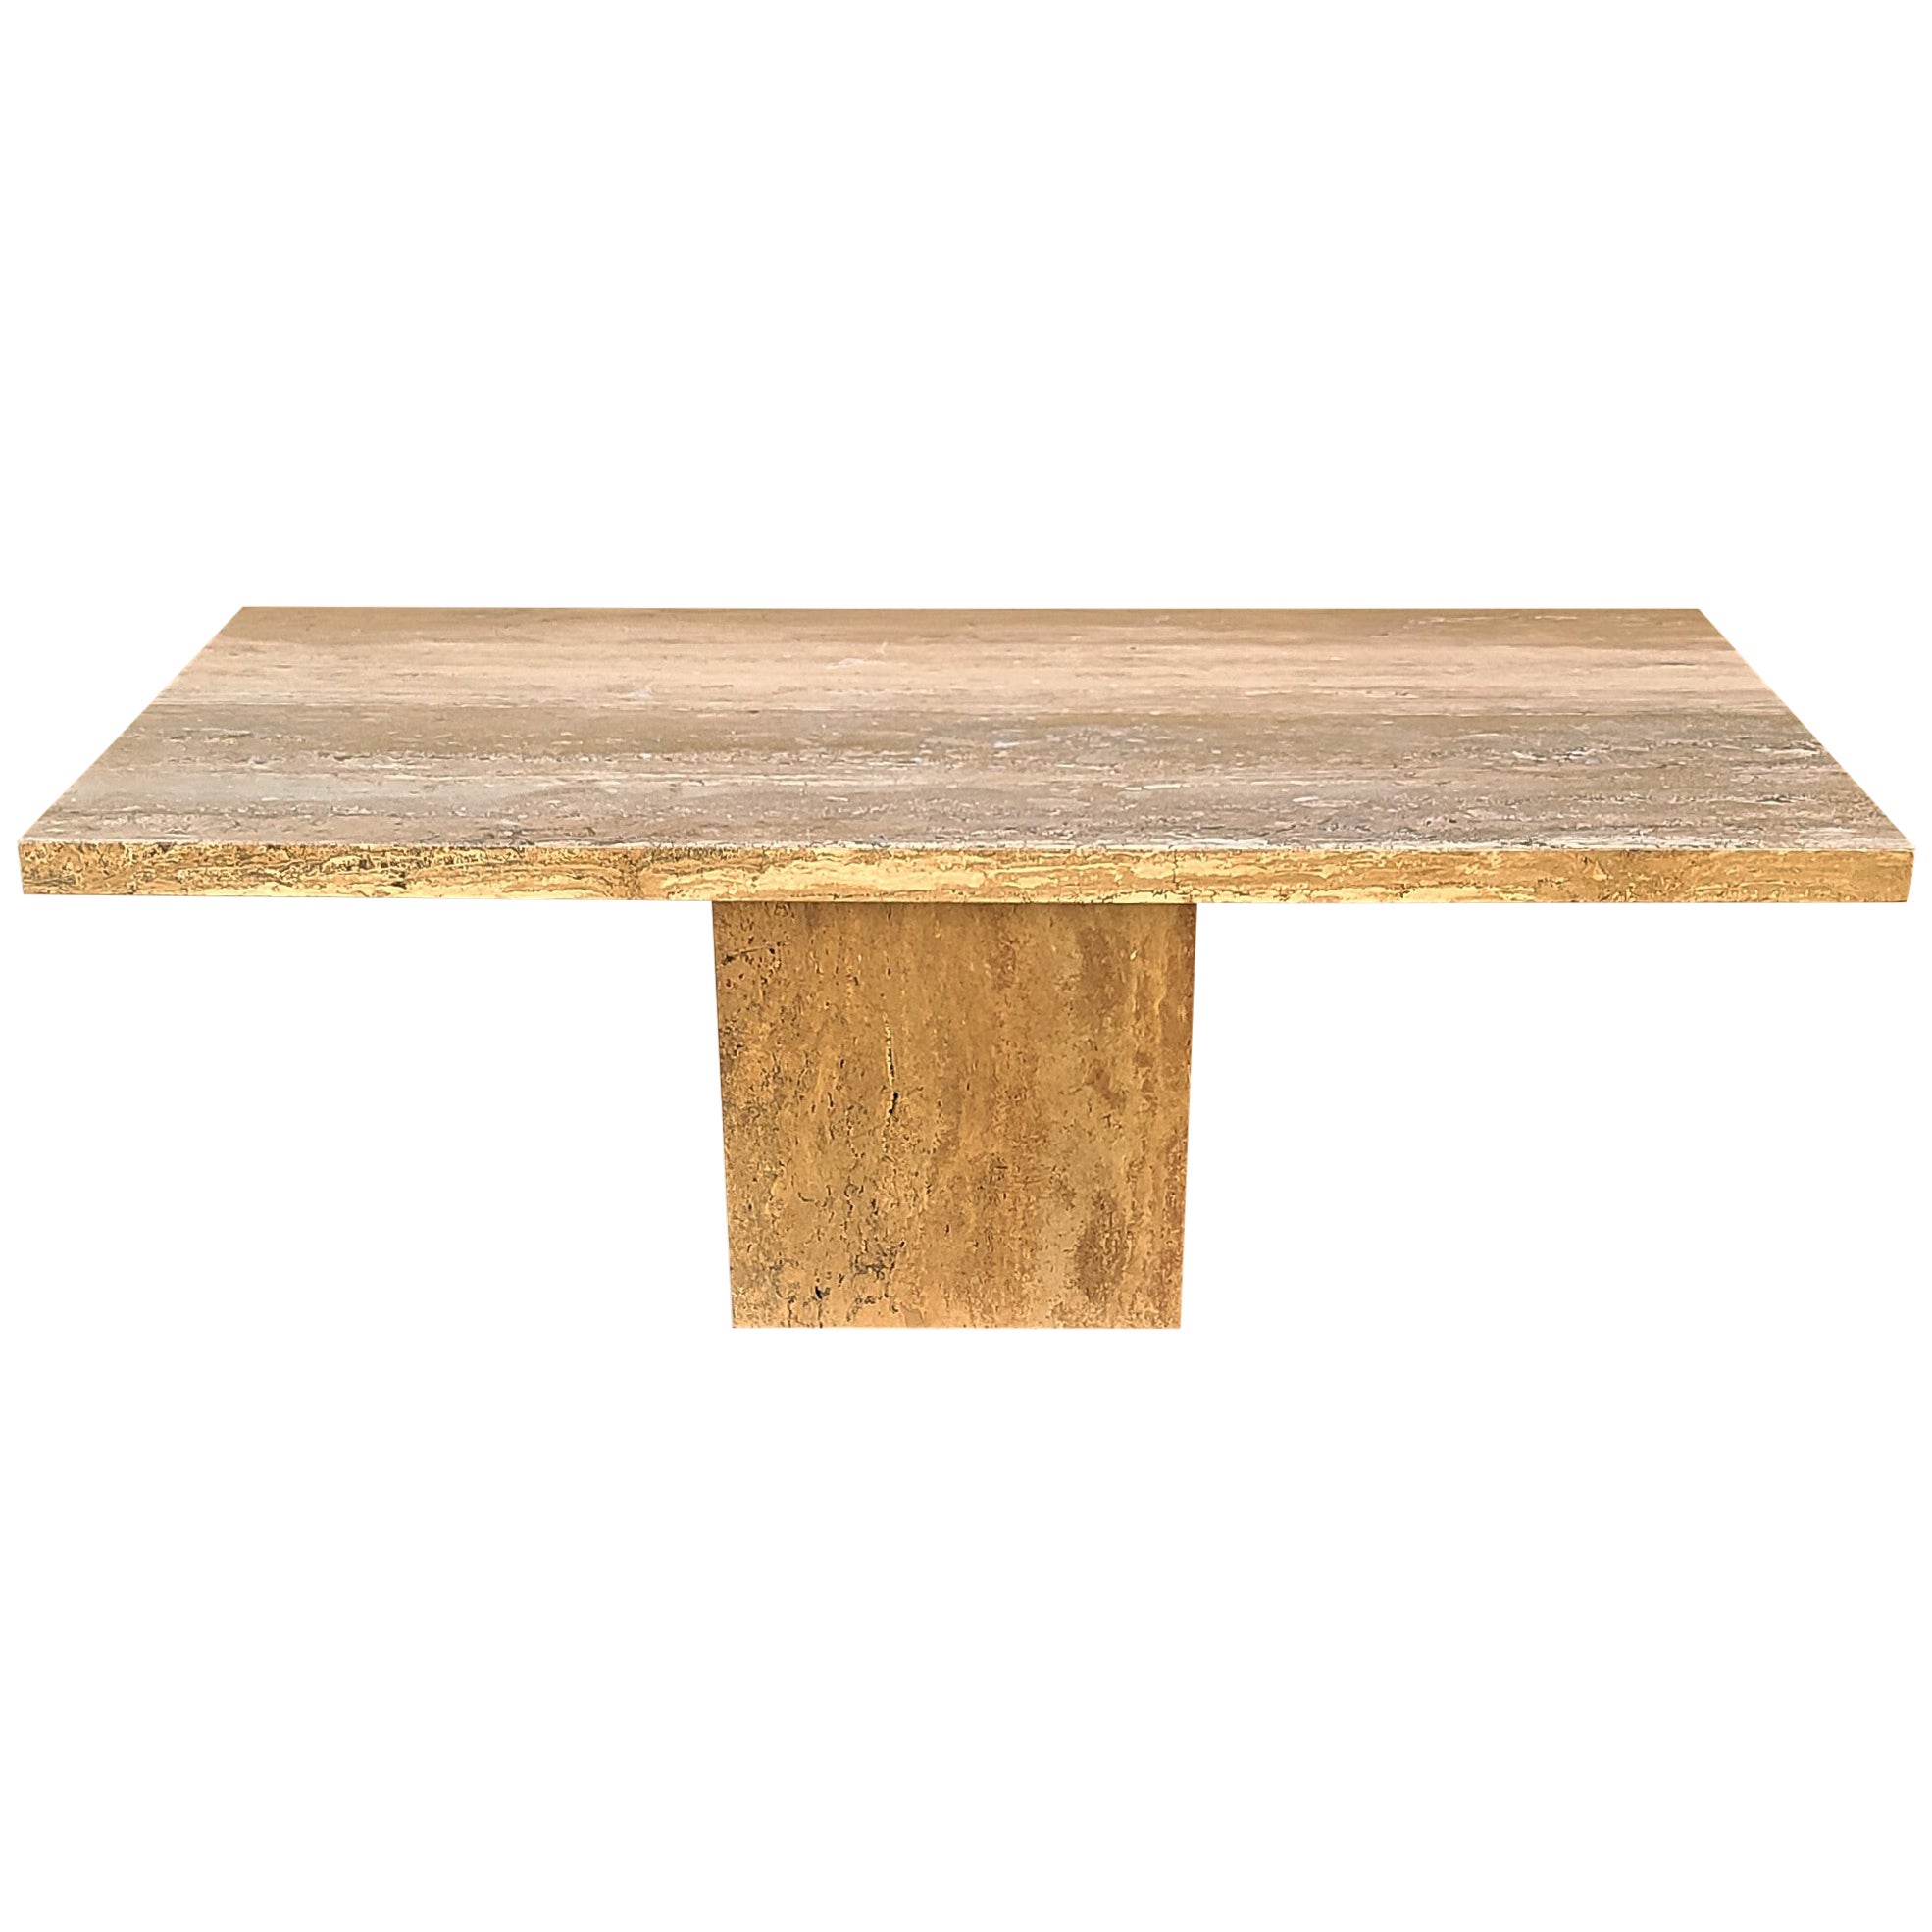 70's Italian Walnut Travertine Highly Polished Marble Dining Table